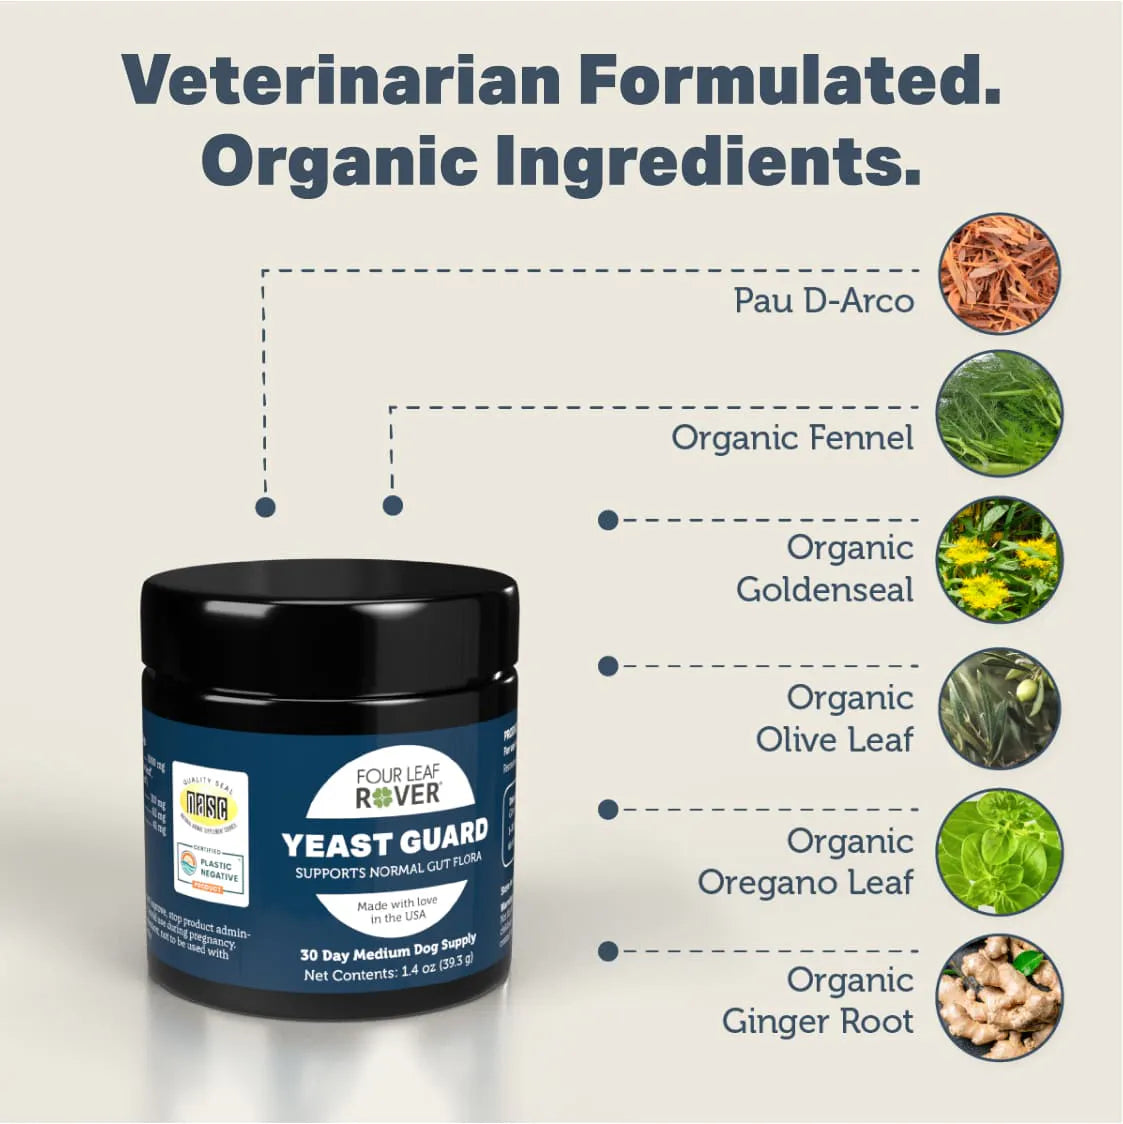 Four Leaf Rover Yeast Guard | Anti-fungal Herbs For Dogs